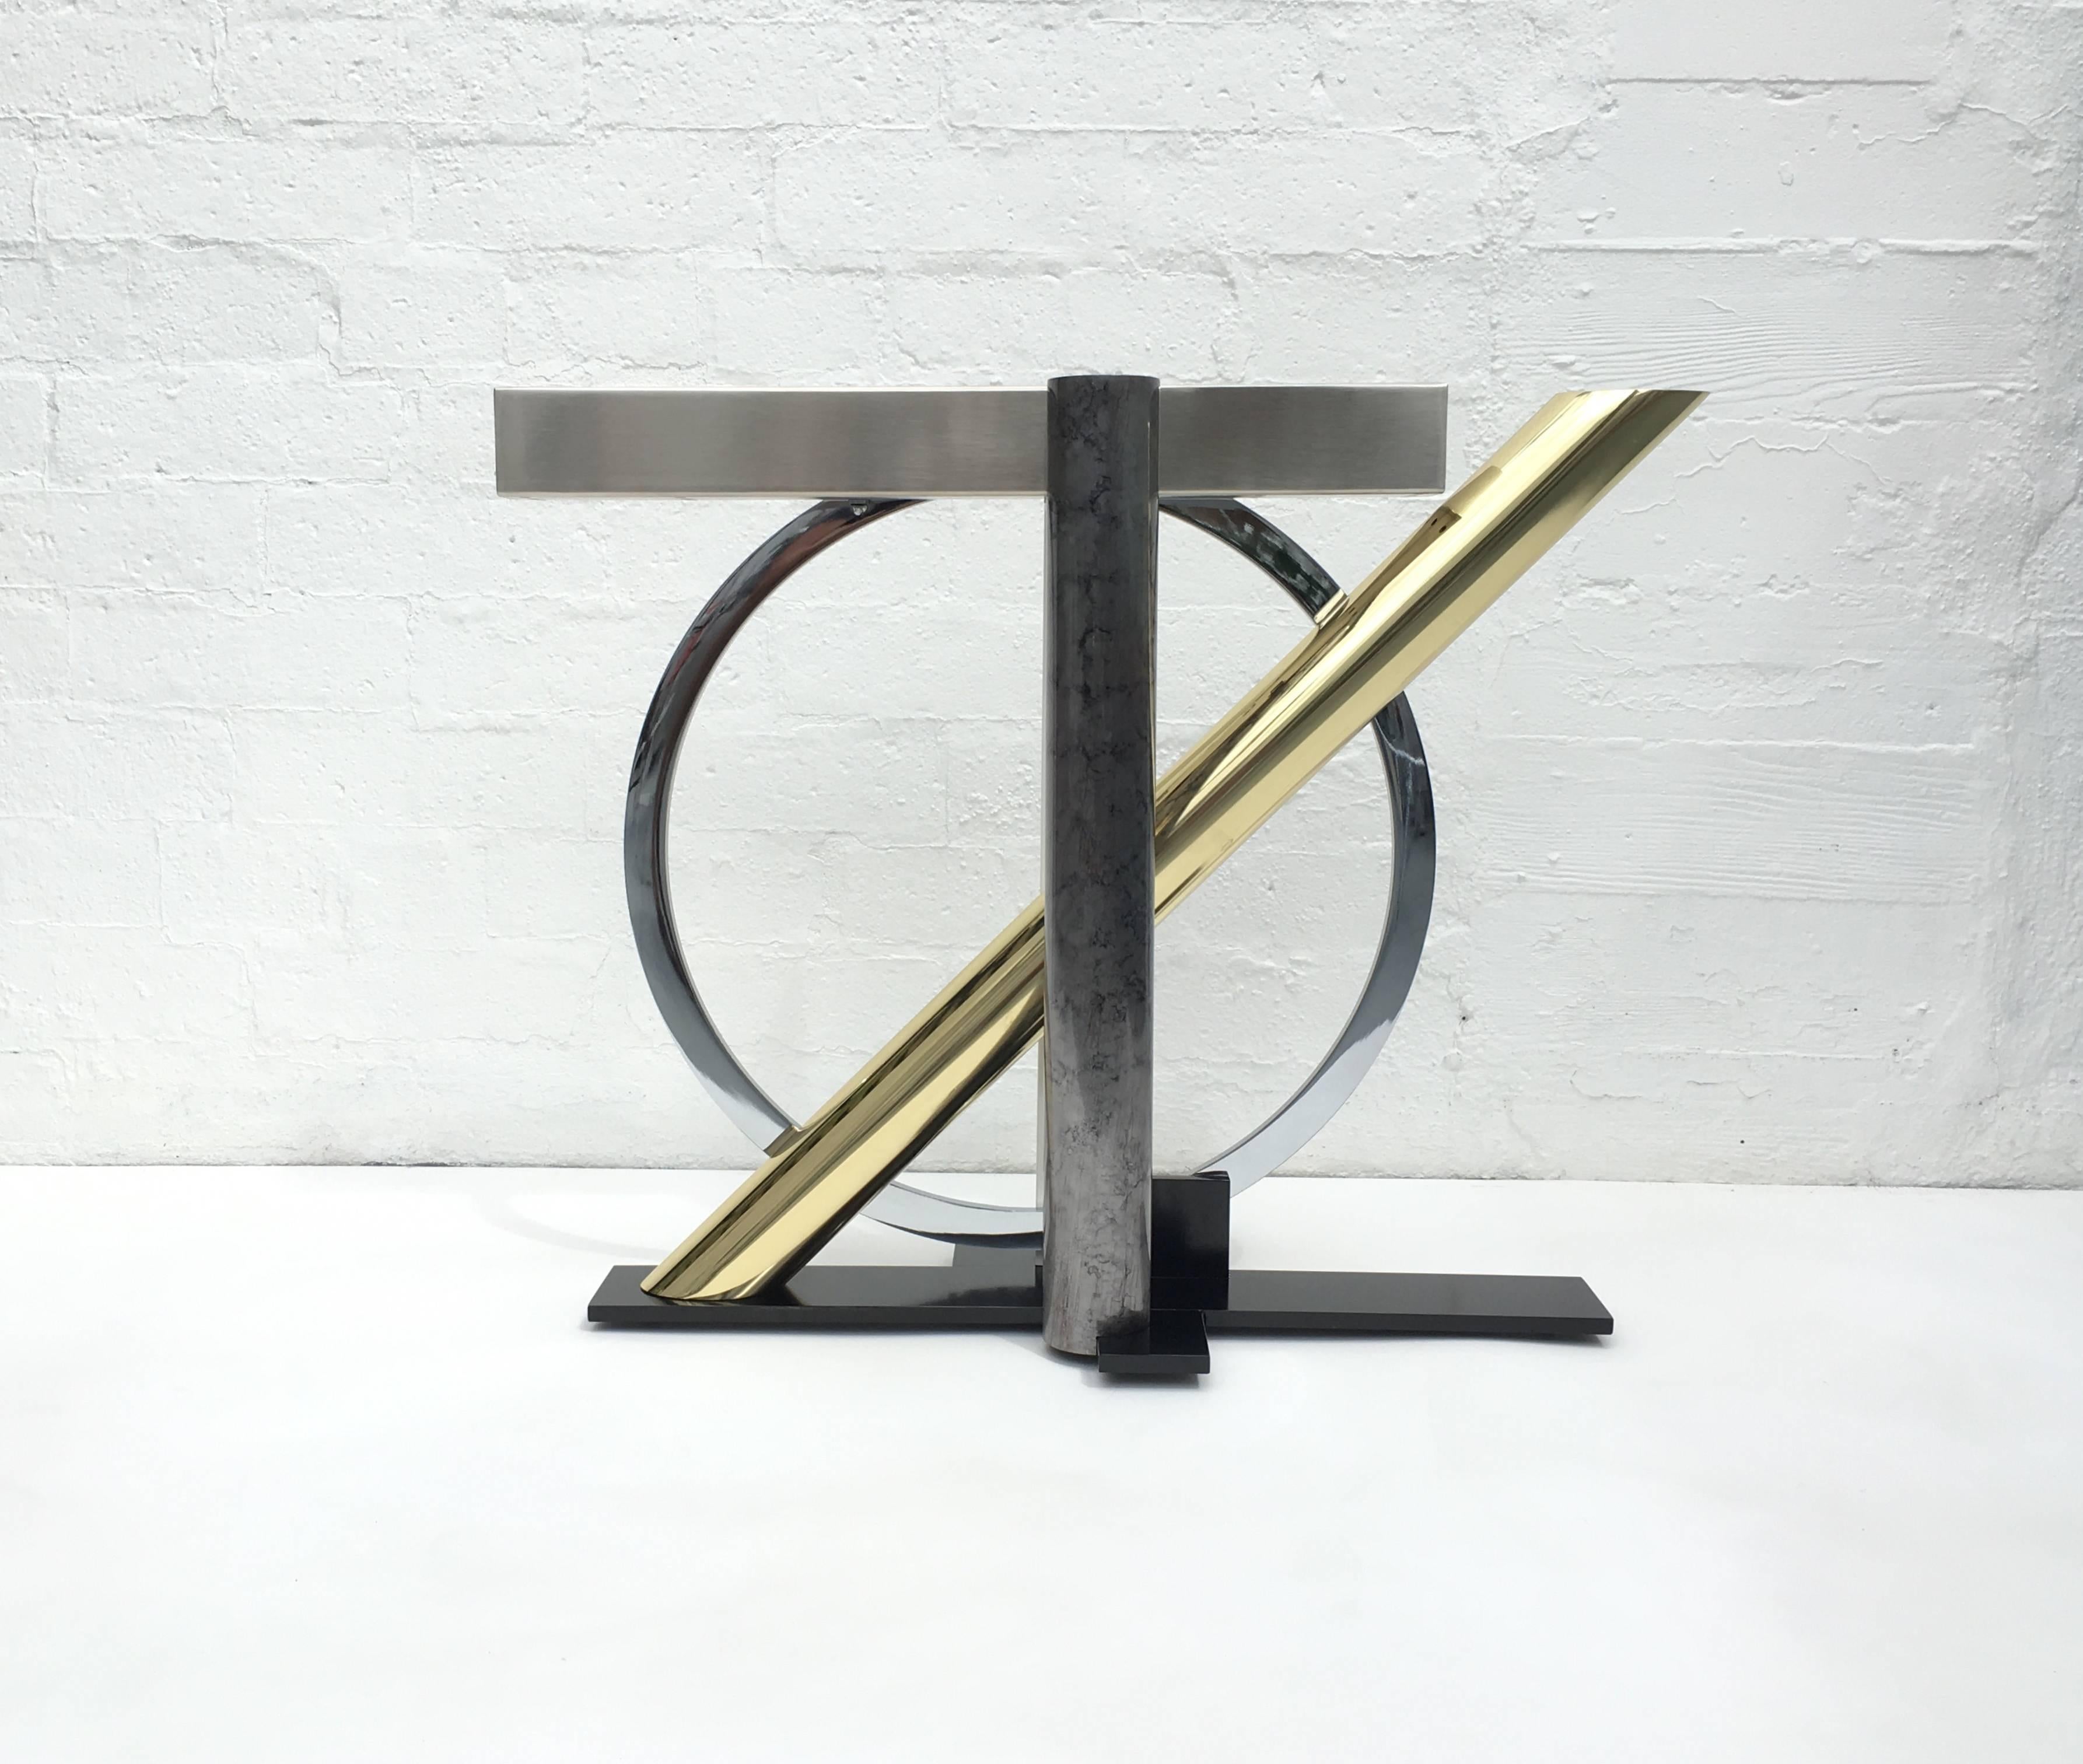 Polished Sculptural Console Table by Kaizo Oto for Design Institute of America